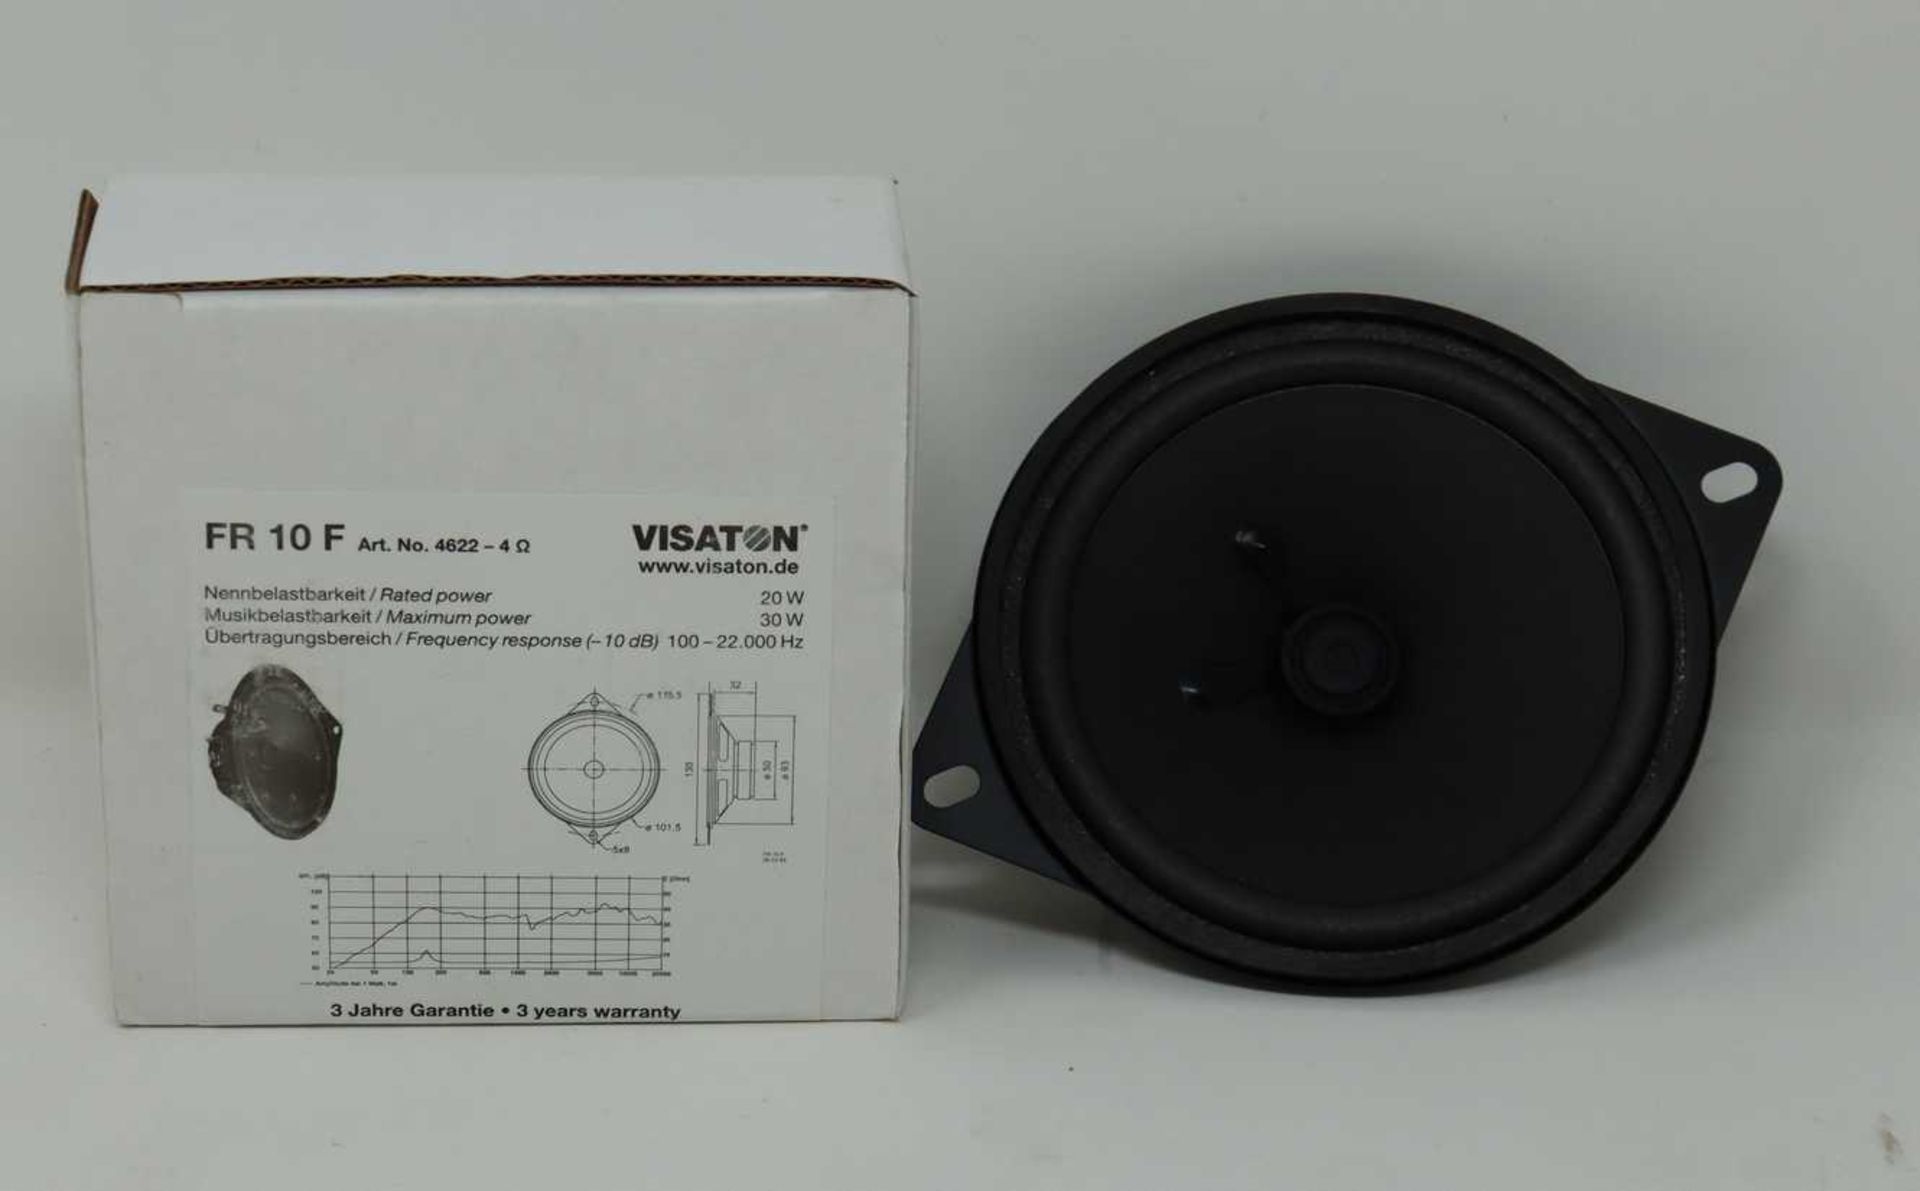 Two boxed as new Vistaton FR 10 F 4622 10cm Speakers.